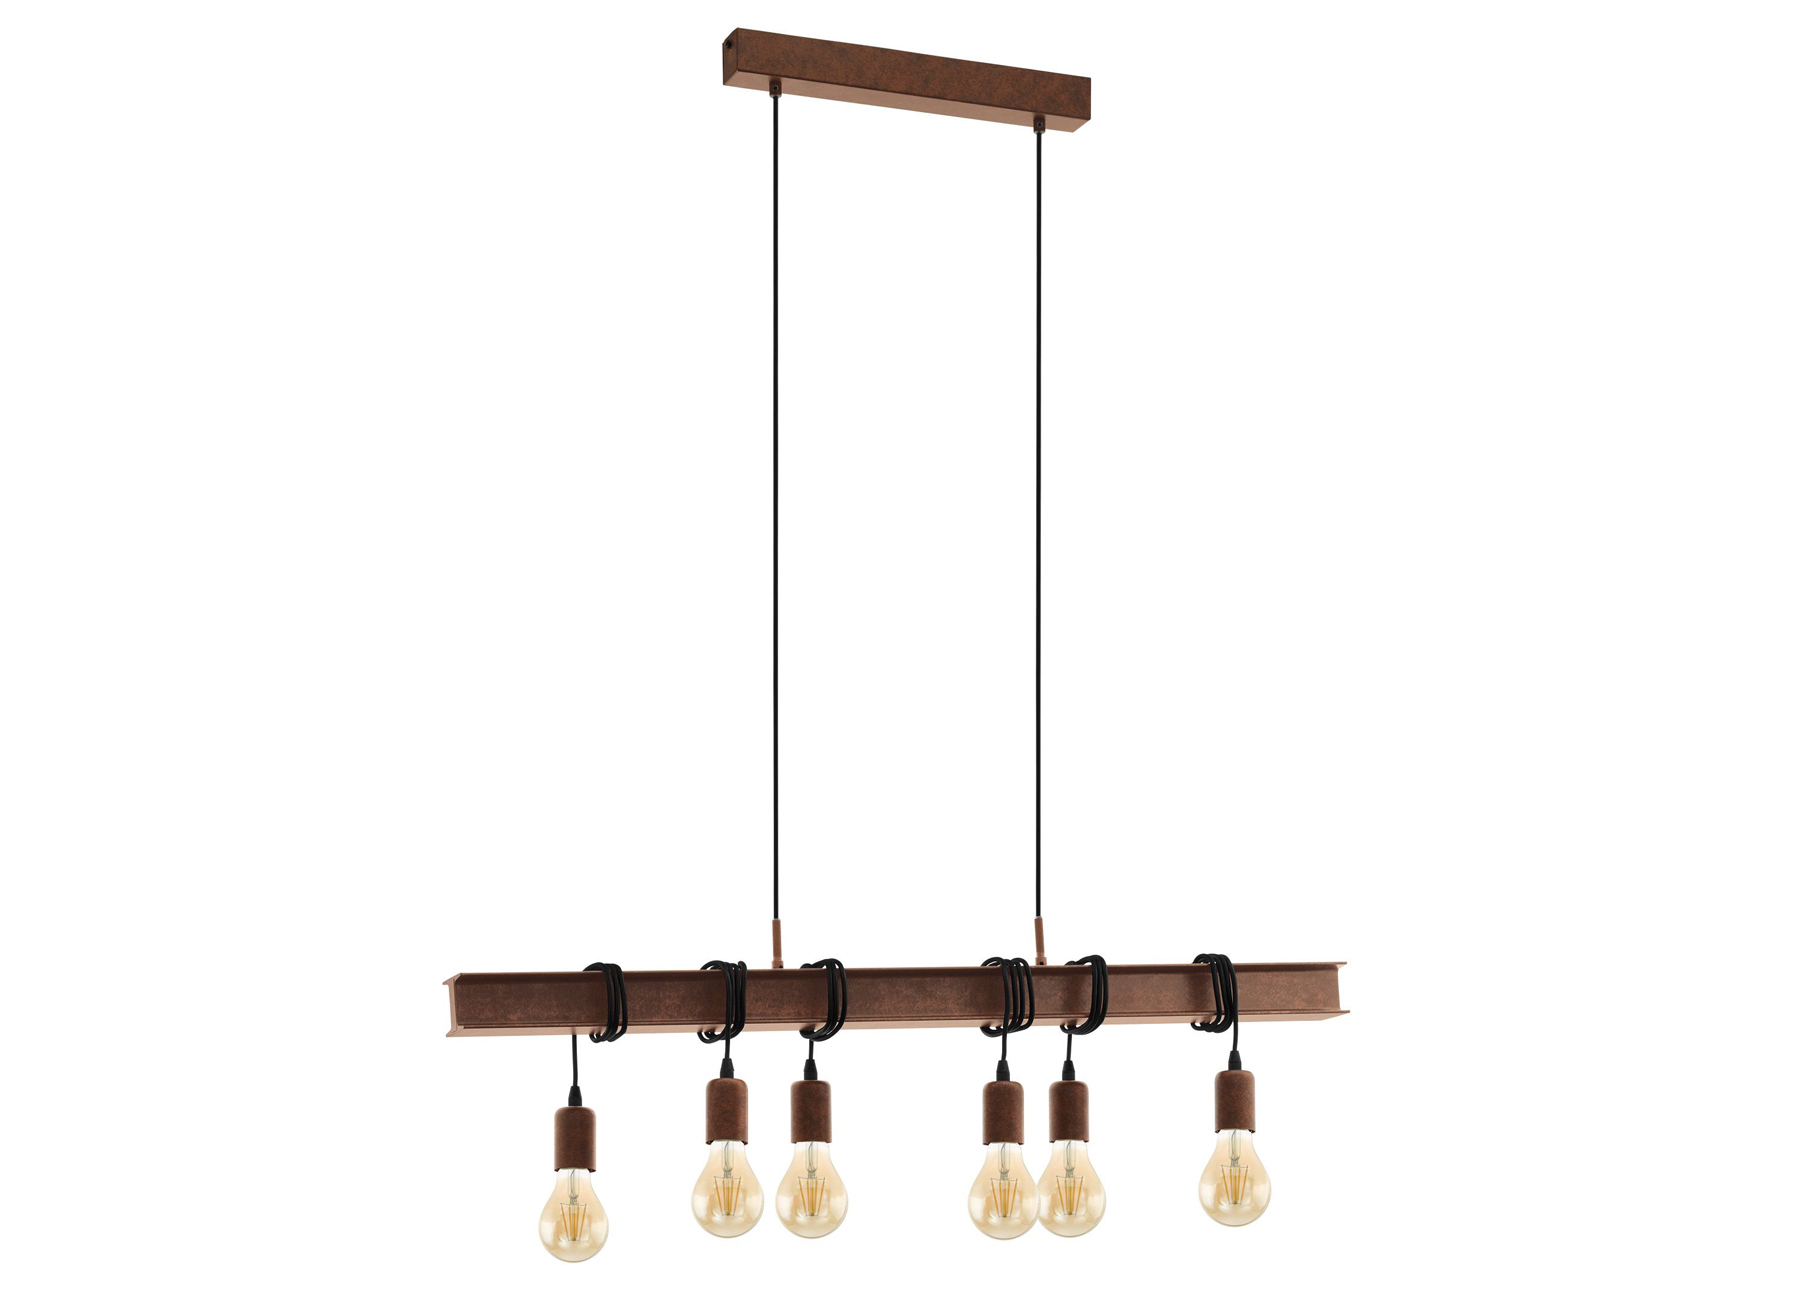 EGLO HANGLAMP STAAL/BRUIN TOWNSHEND 4 6X60W